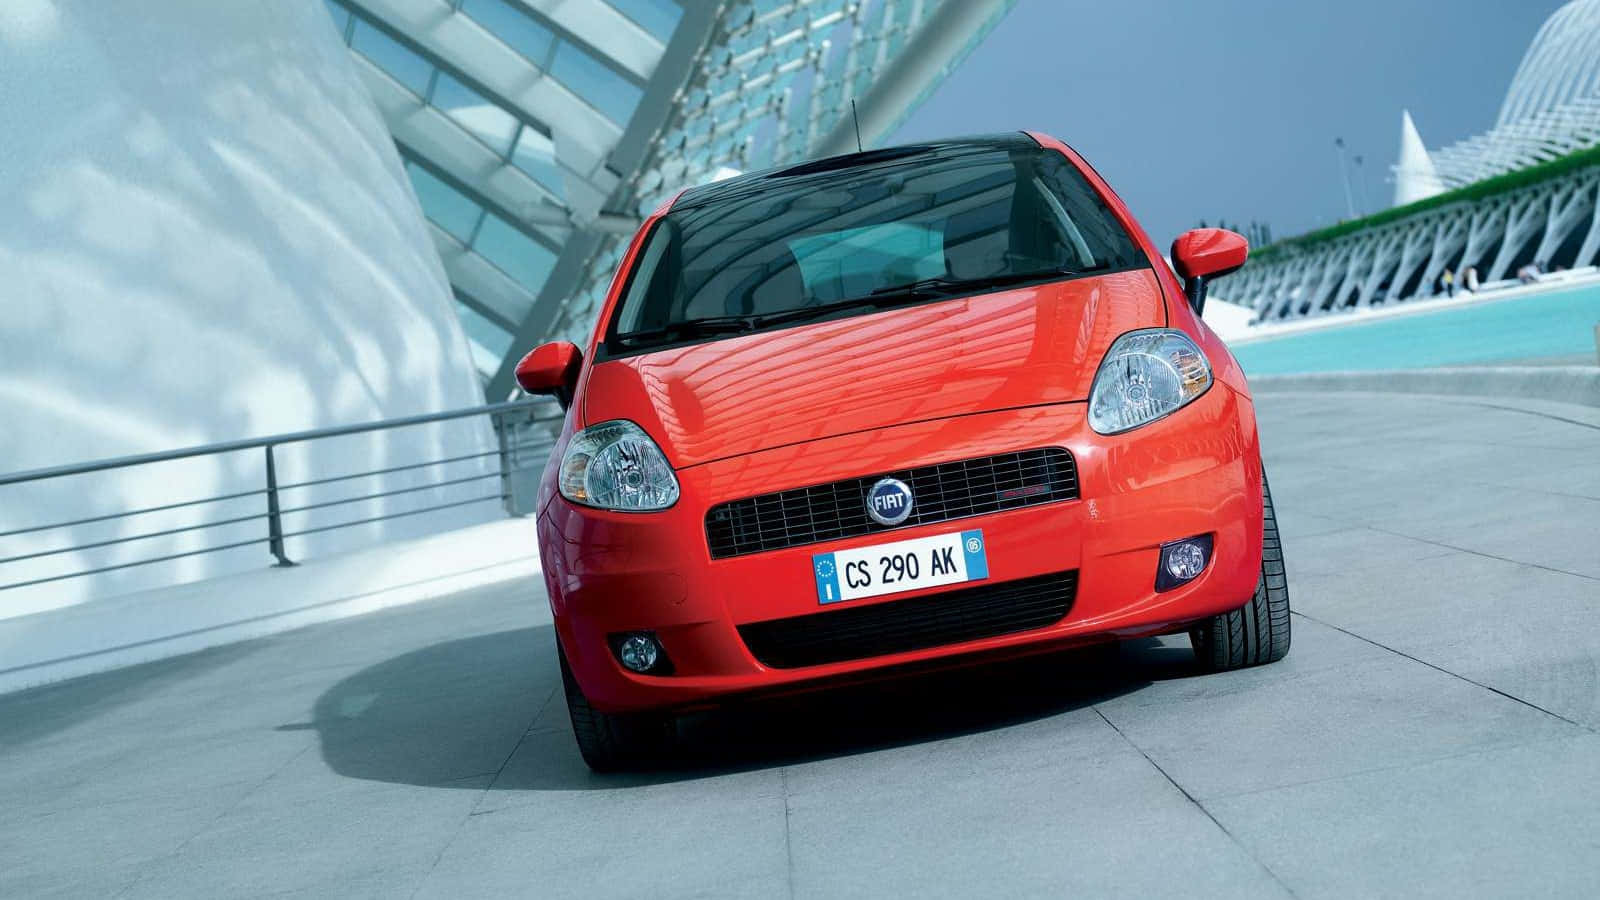 Sleek and Stylish Fiat Punto on the Road Wallpaper